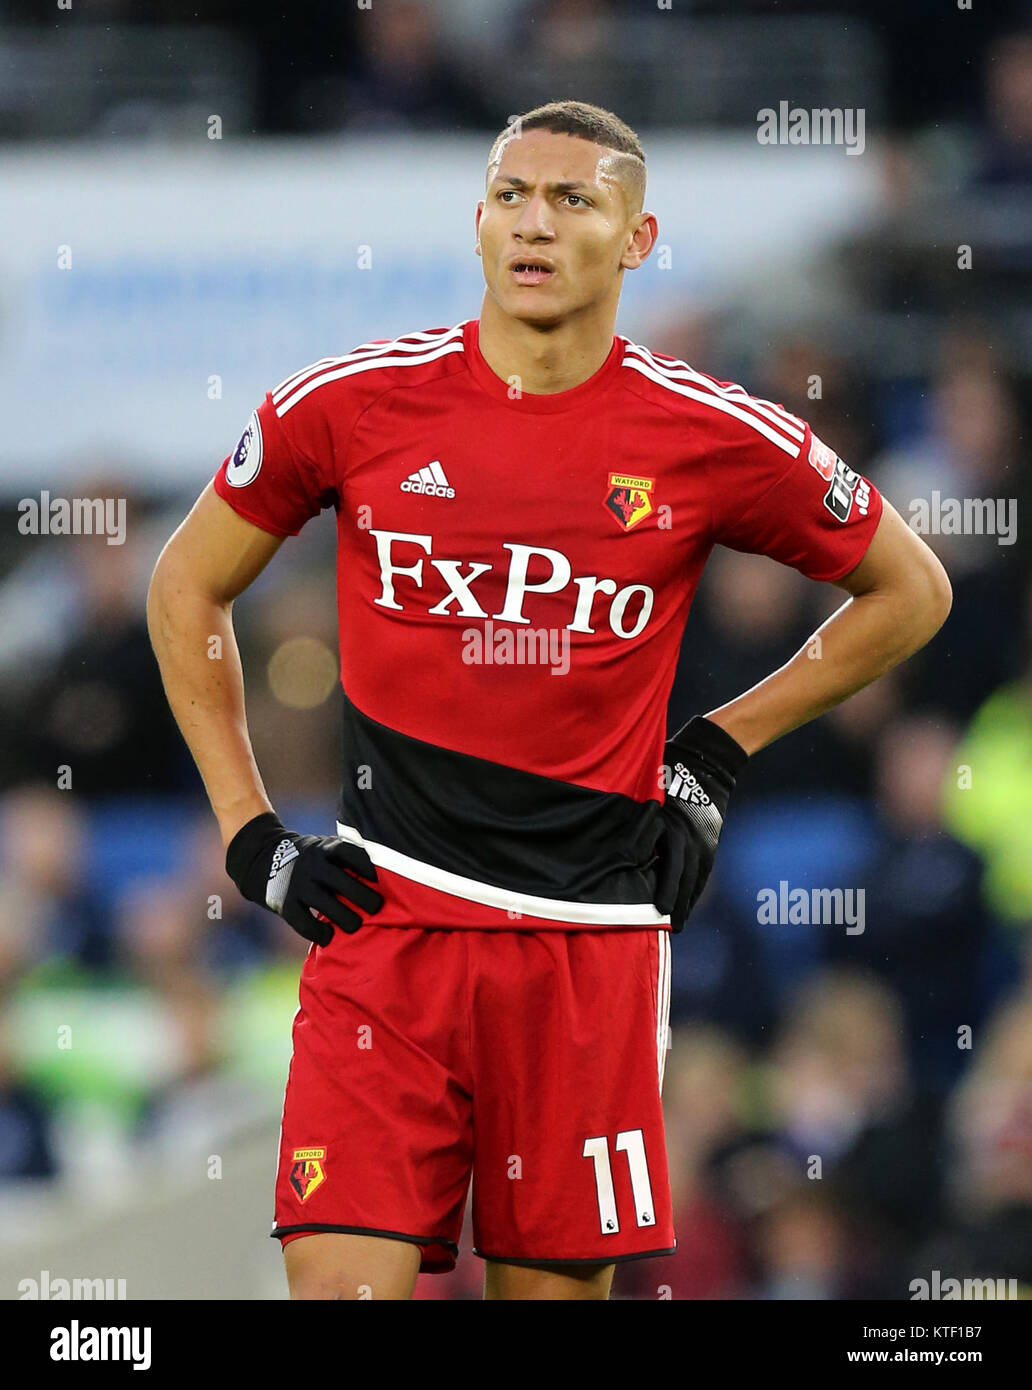 Watford's Richarlison during the Premier League match at the AMEX Stadium, Brighton. PRESS ASSOCIATION Photo. Picture date: Saturday December 23, 2017. See PA story SOCCER Brighton. Photo credit should read: Gareth Fuller/PA Wire. RESTRICTIONS: No use with unauthorised audio, video, data, fixture lists, club/league logos or 'live' services. Online in-match use limited to 75 images, no video emulation. No use in betting, games or single club/league/player publications Stock Photo